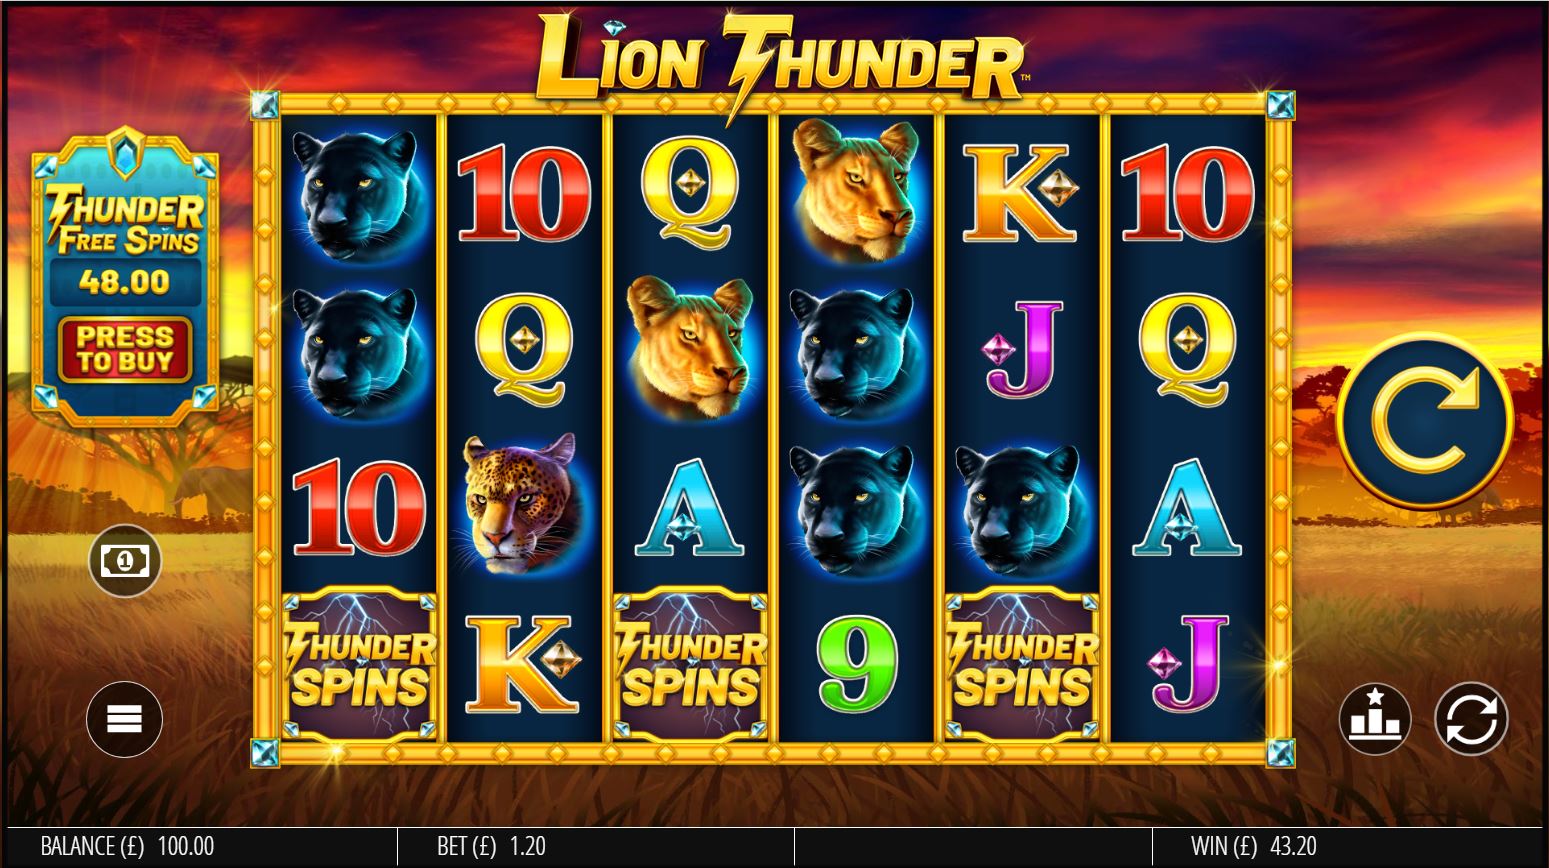 Lion Thunder Spin Boost Free Spins